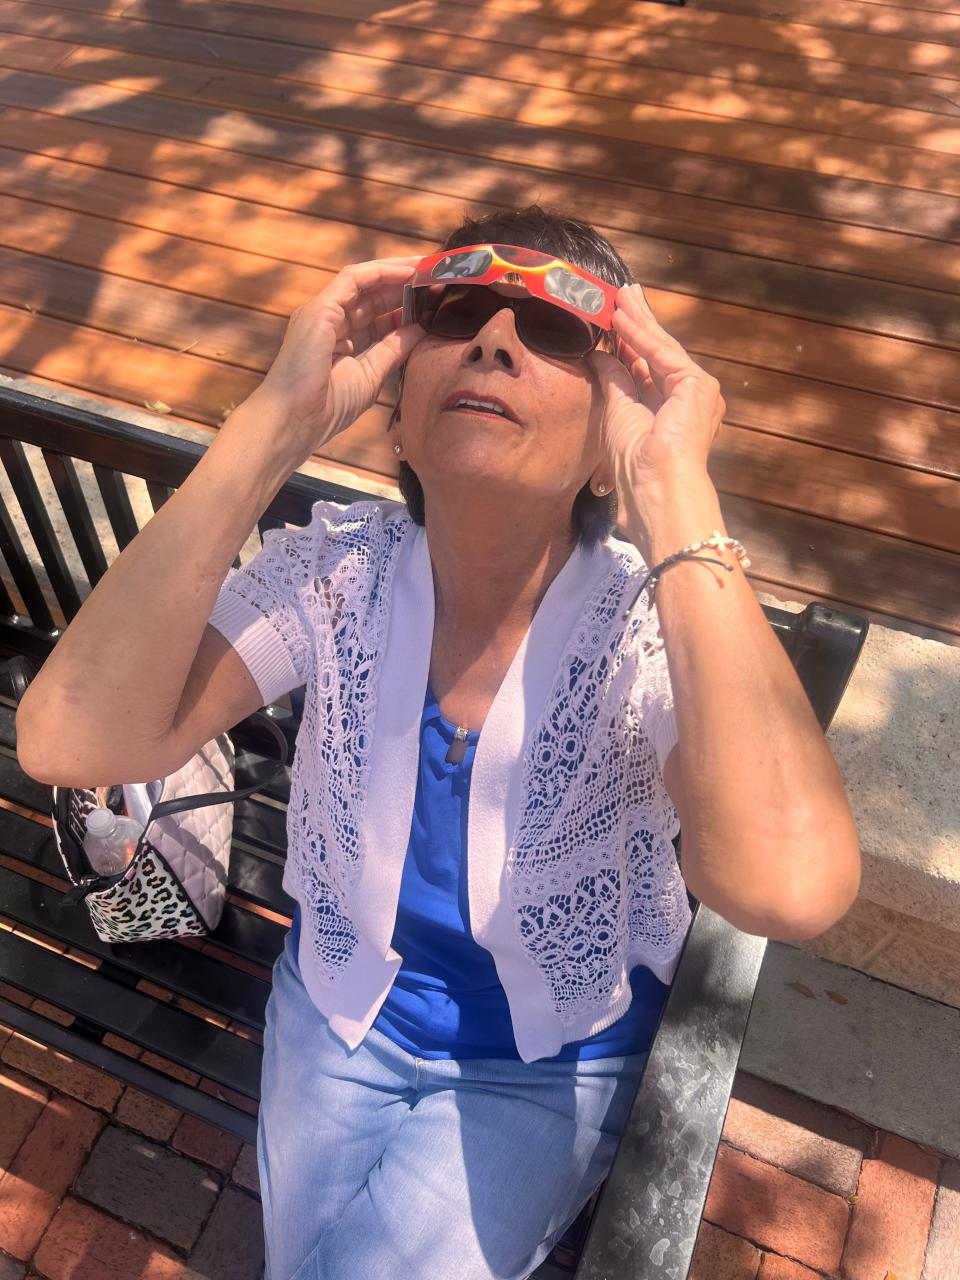 "Wow. I have never seen this before." Anita Mazella, of Melbourne as she looks up at the eclipse.